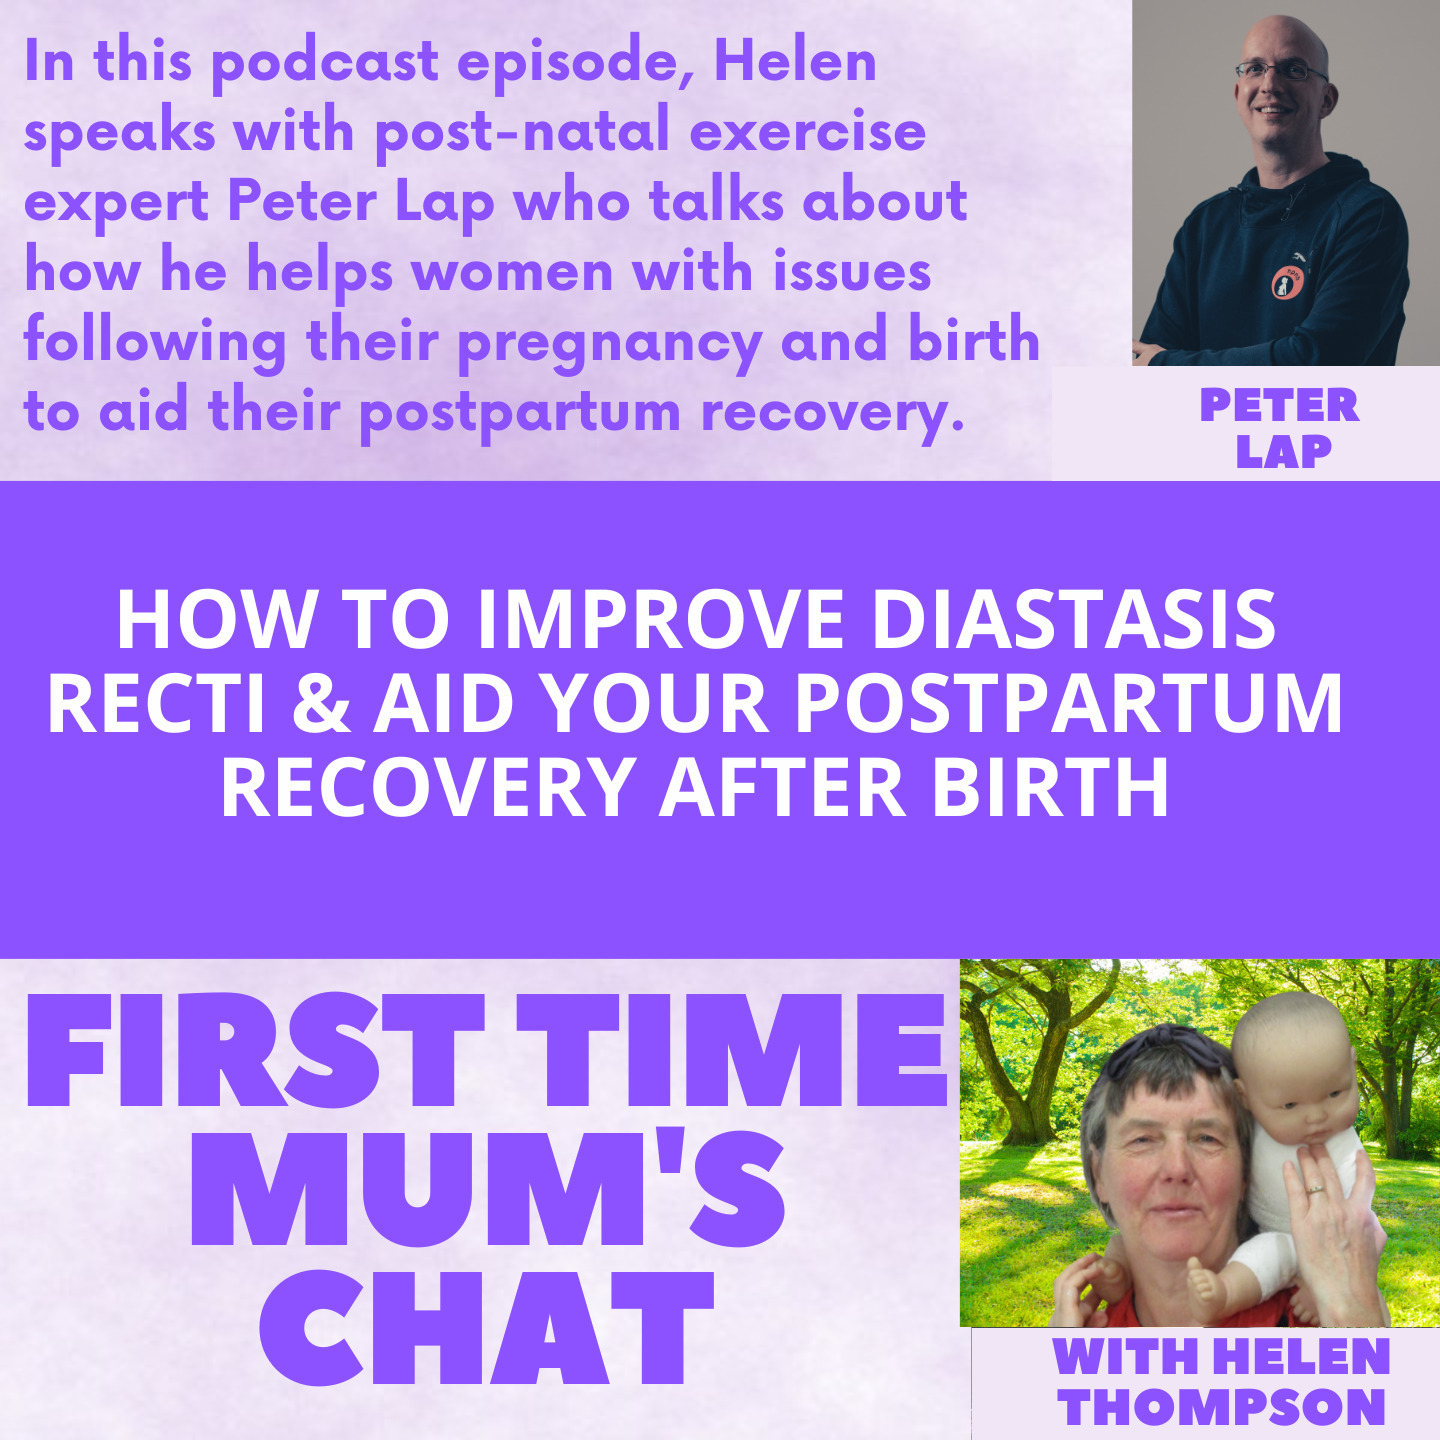 How to Improve Diastasis Recti & Aid Your Postpartum Recovery After Birth